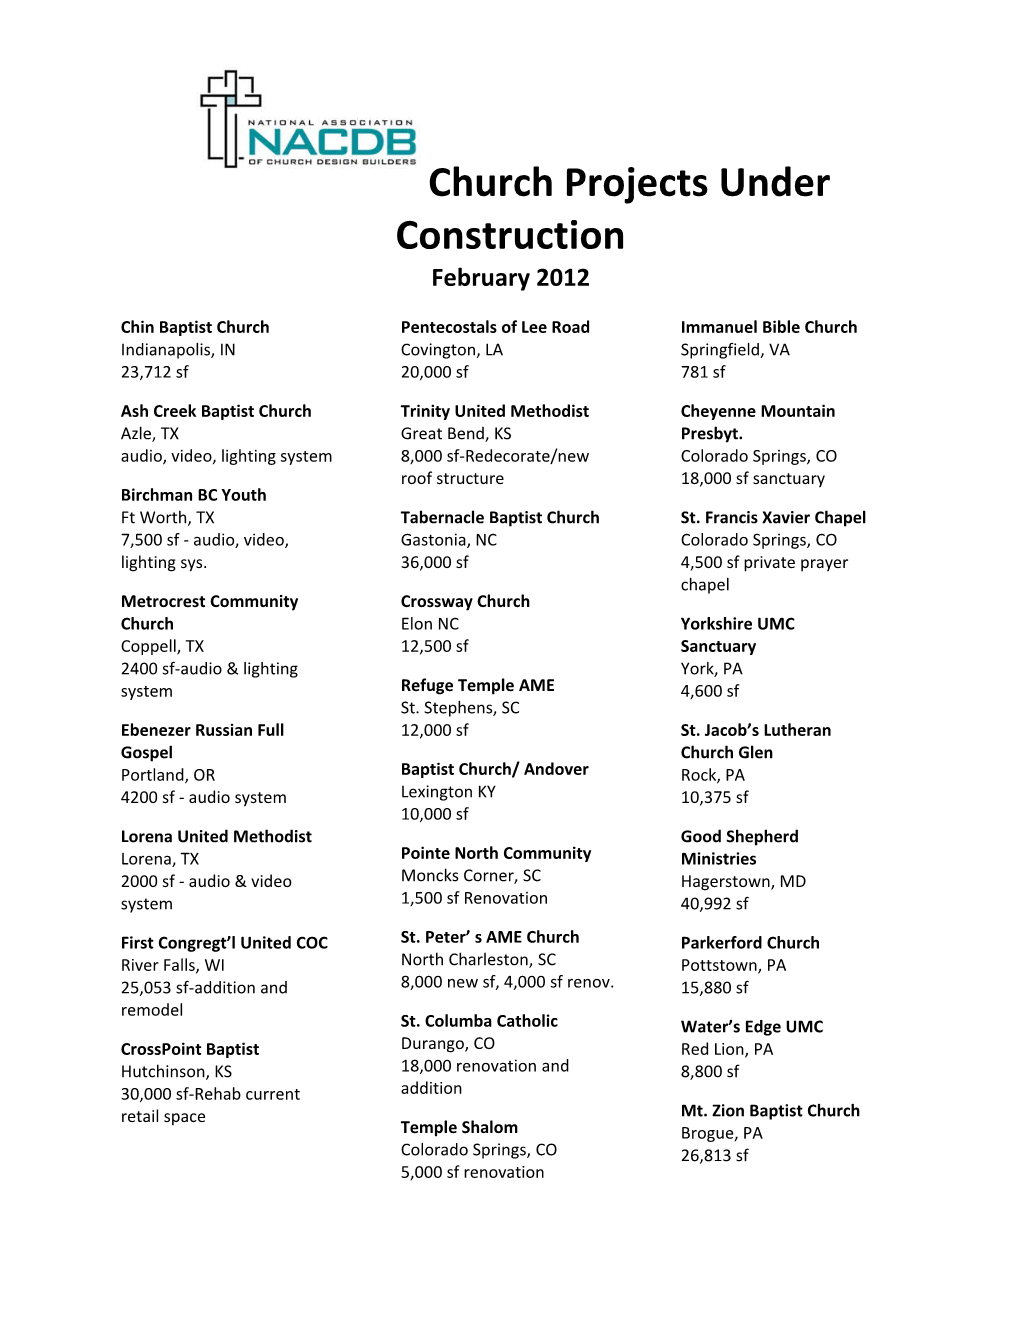 Church Projects Under Construction